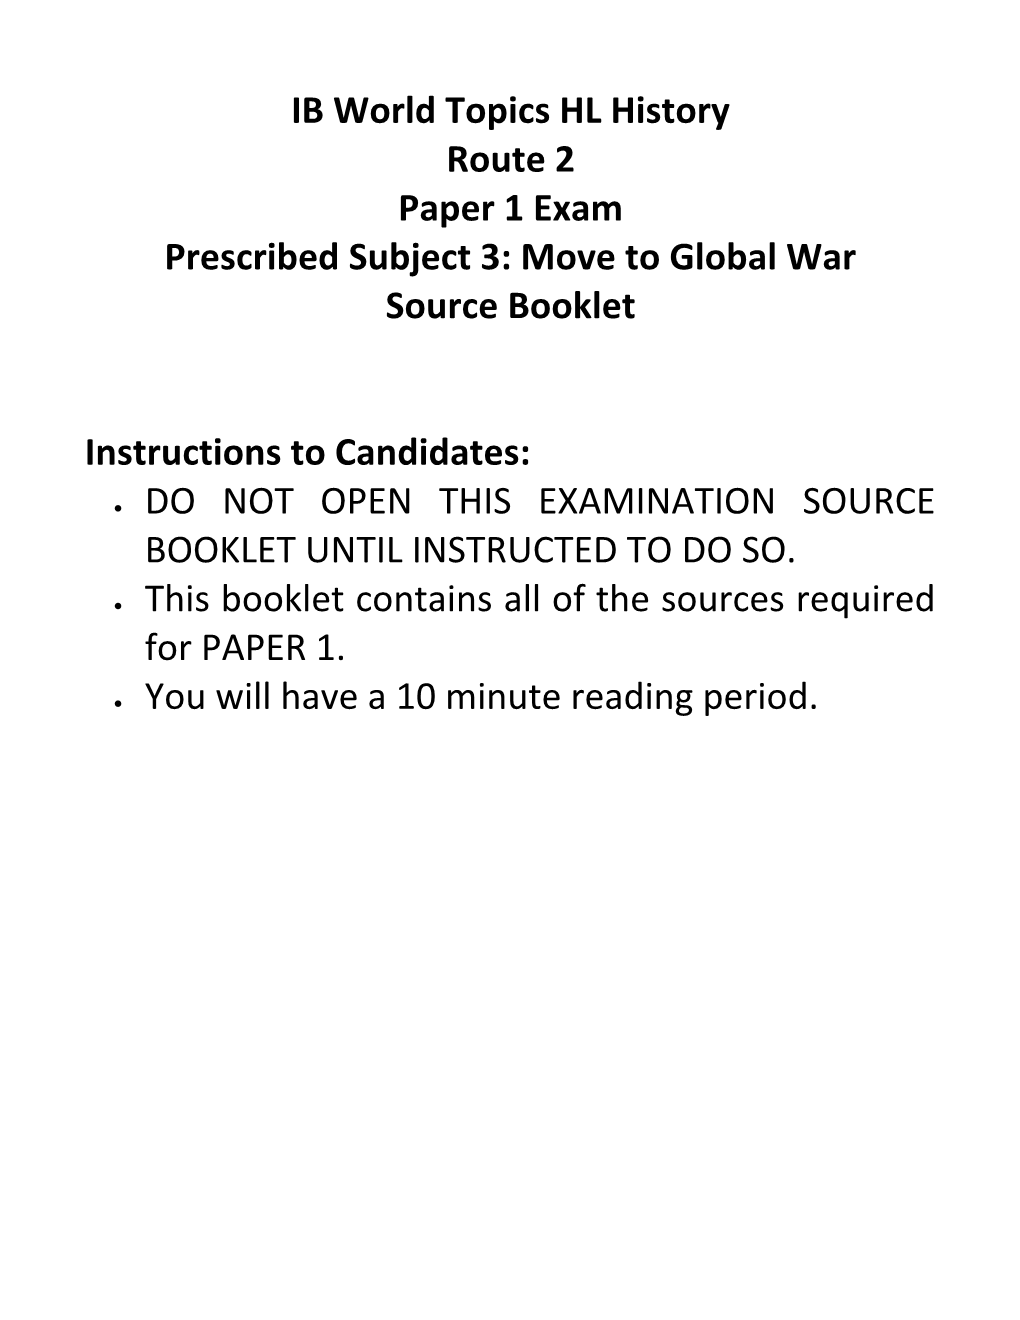 Prescribed Subject 3: Move to Global War